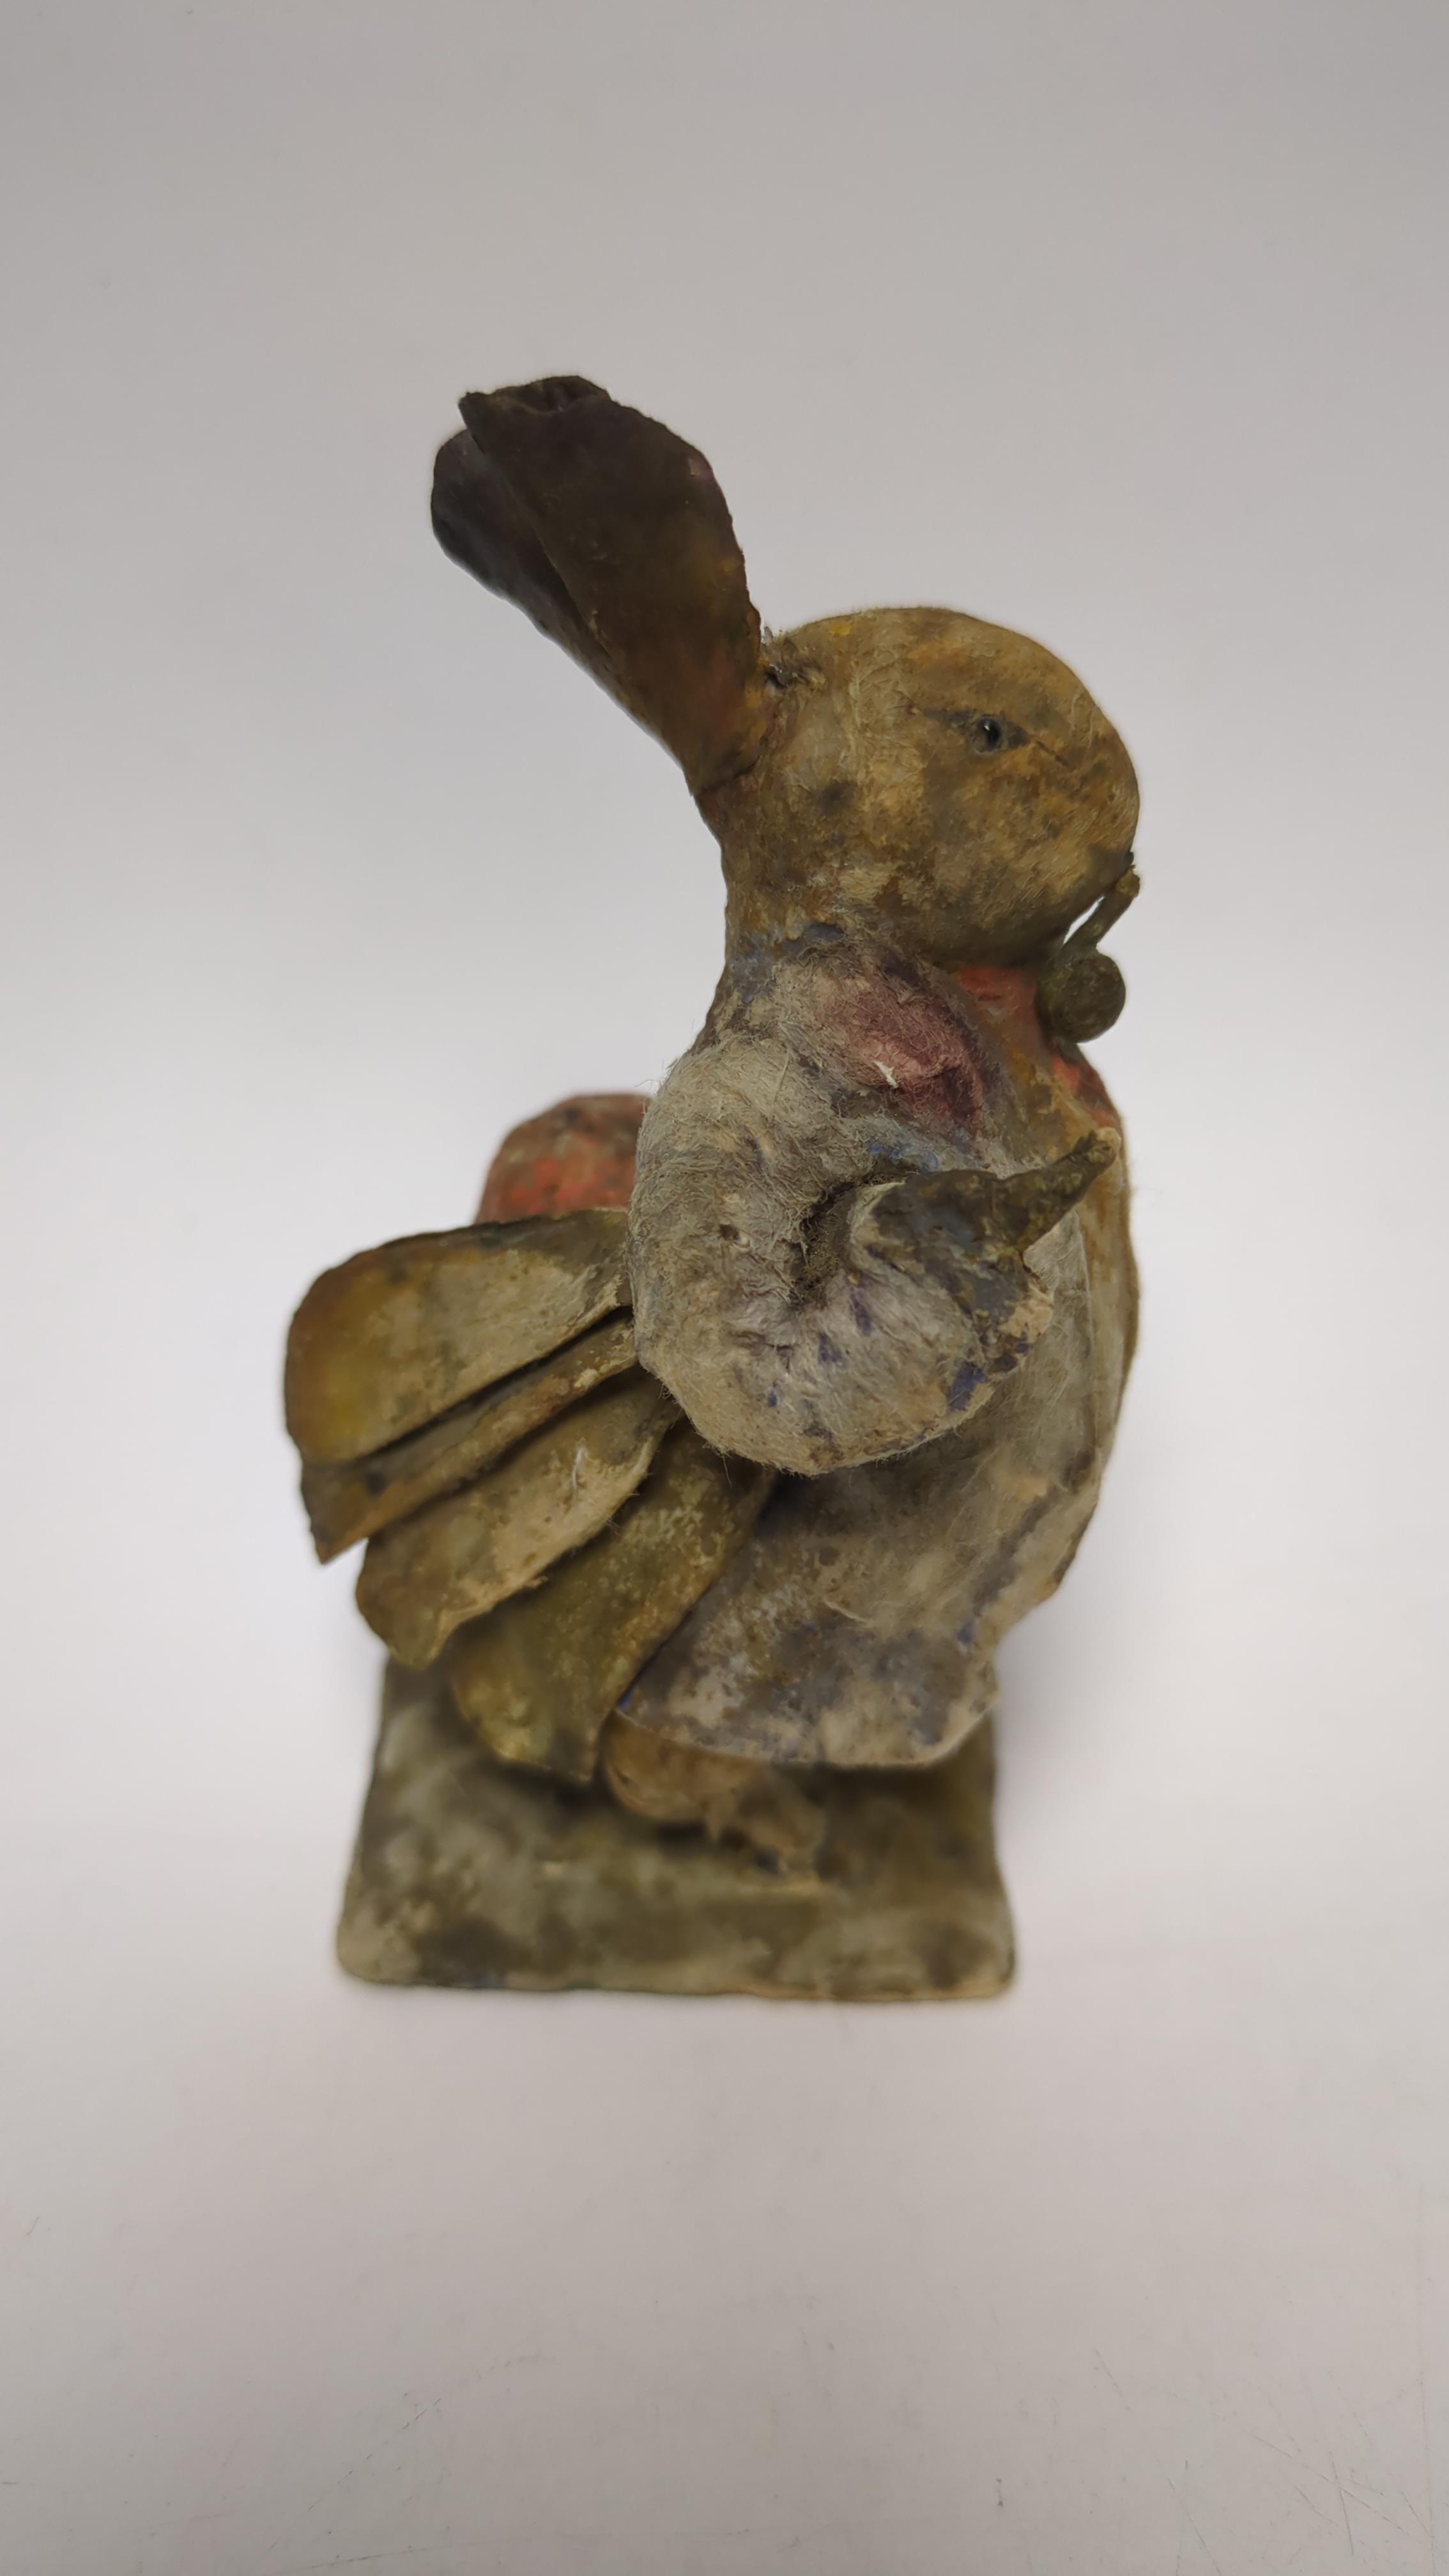 An F. Warne papier-mâché Beatrix Potter figure of Benjamin Bunny with pipe and red handkerchief bag, red and white F. Warne & Co. paper label to the base, dating it to pre-1917, 9cm high